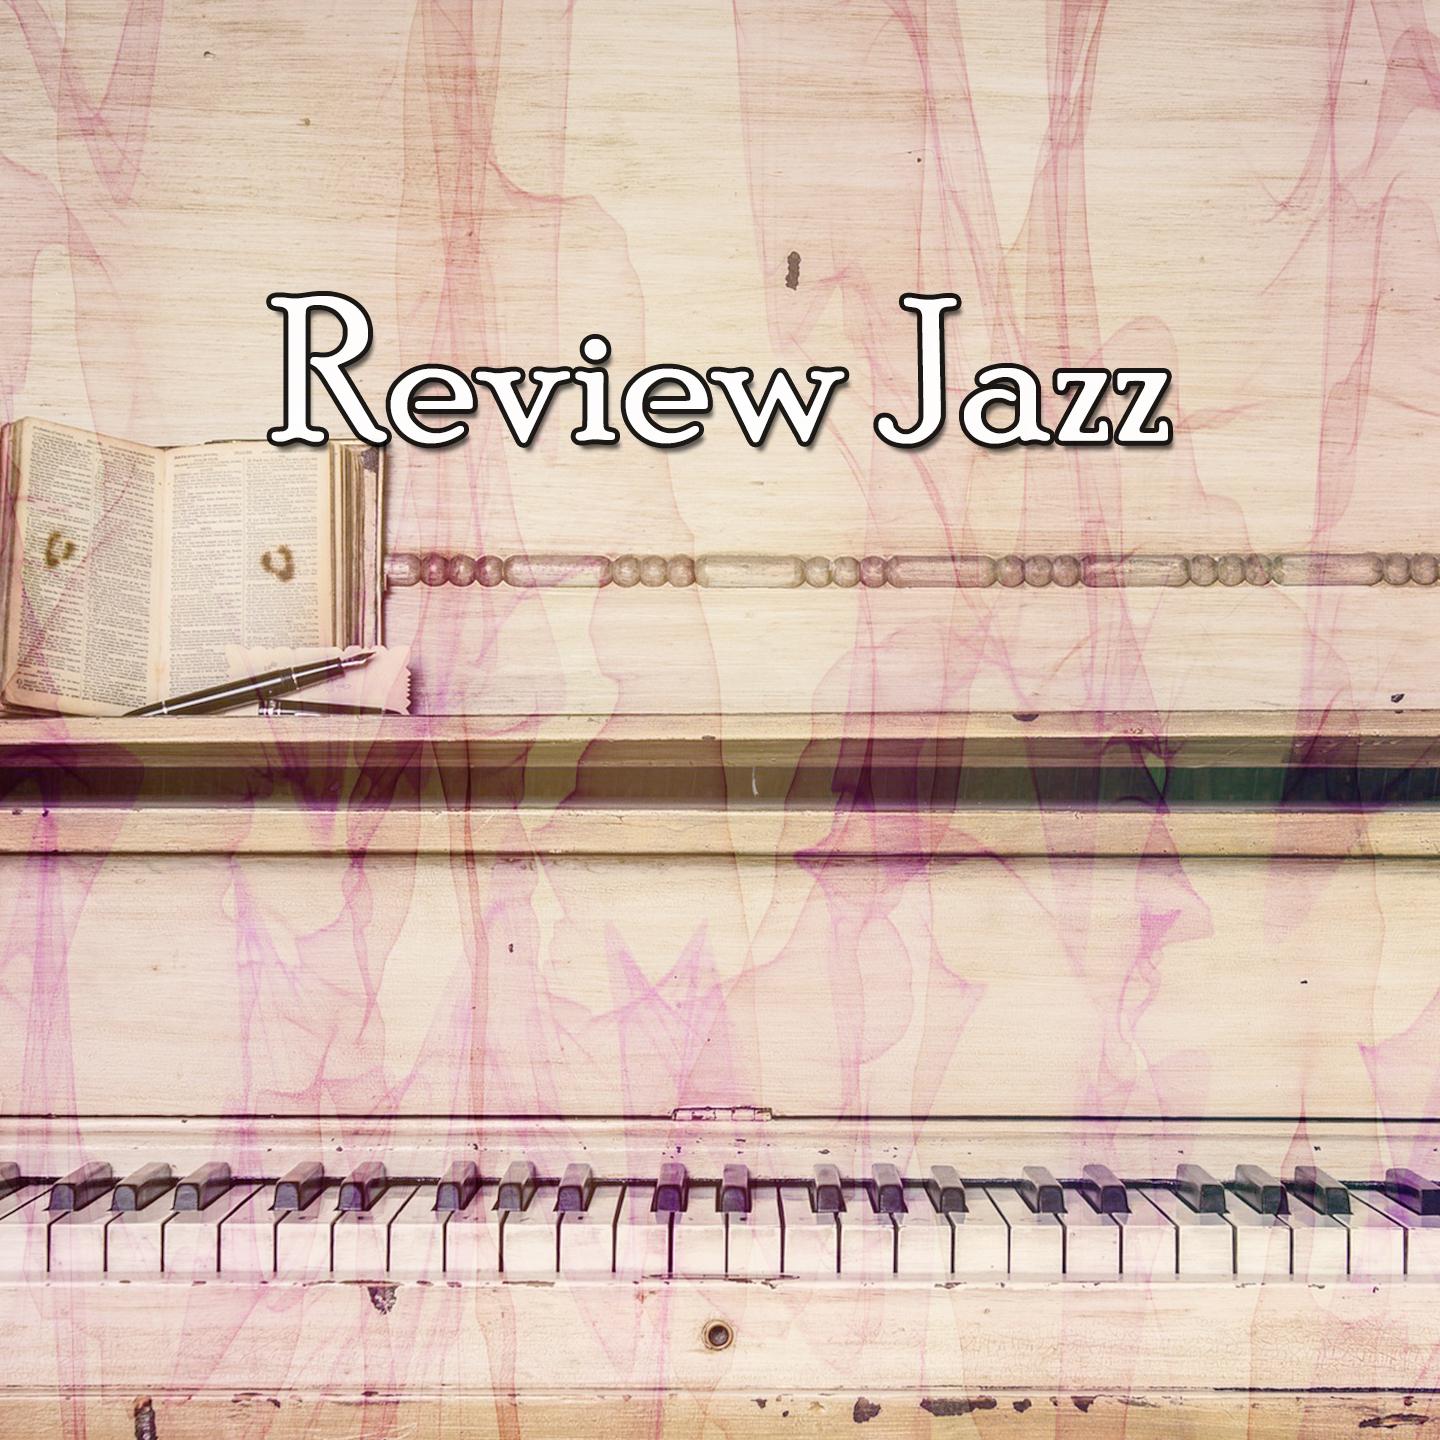 Review Jazz